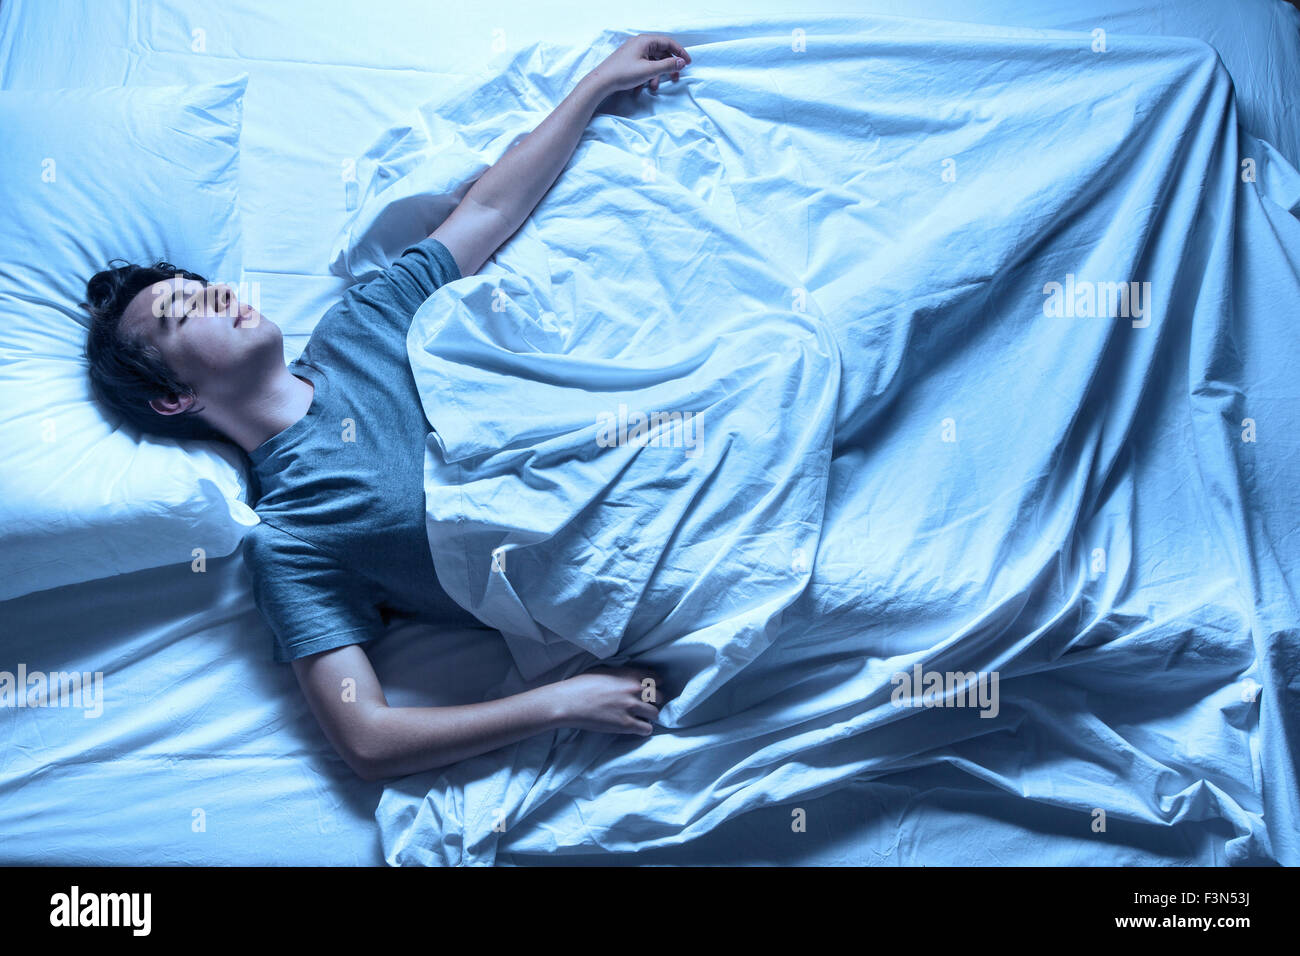 Man asleep in a bed Stock Photo